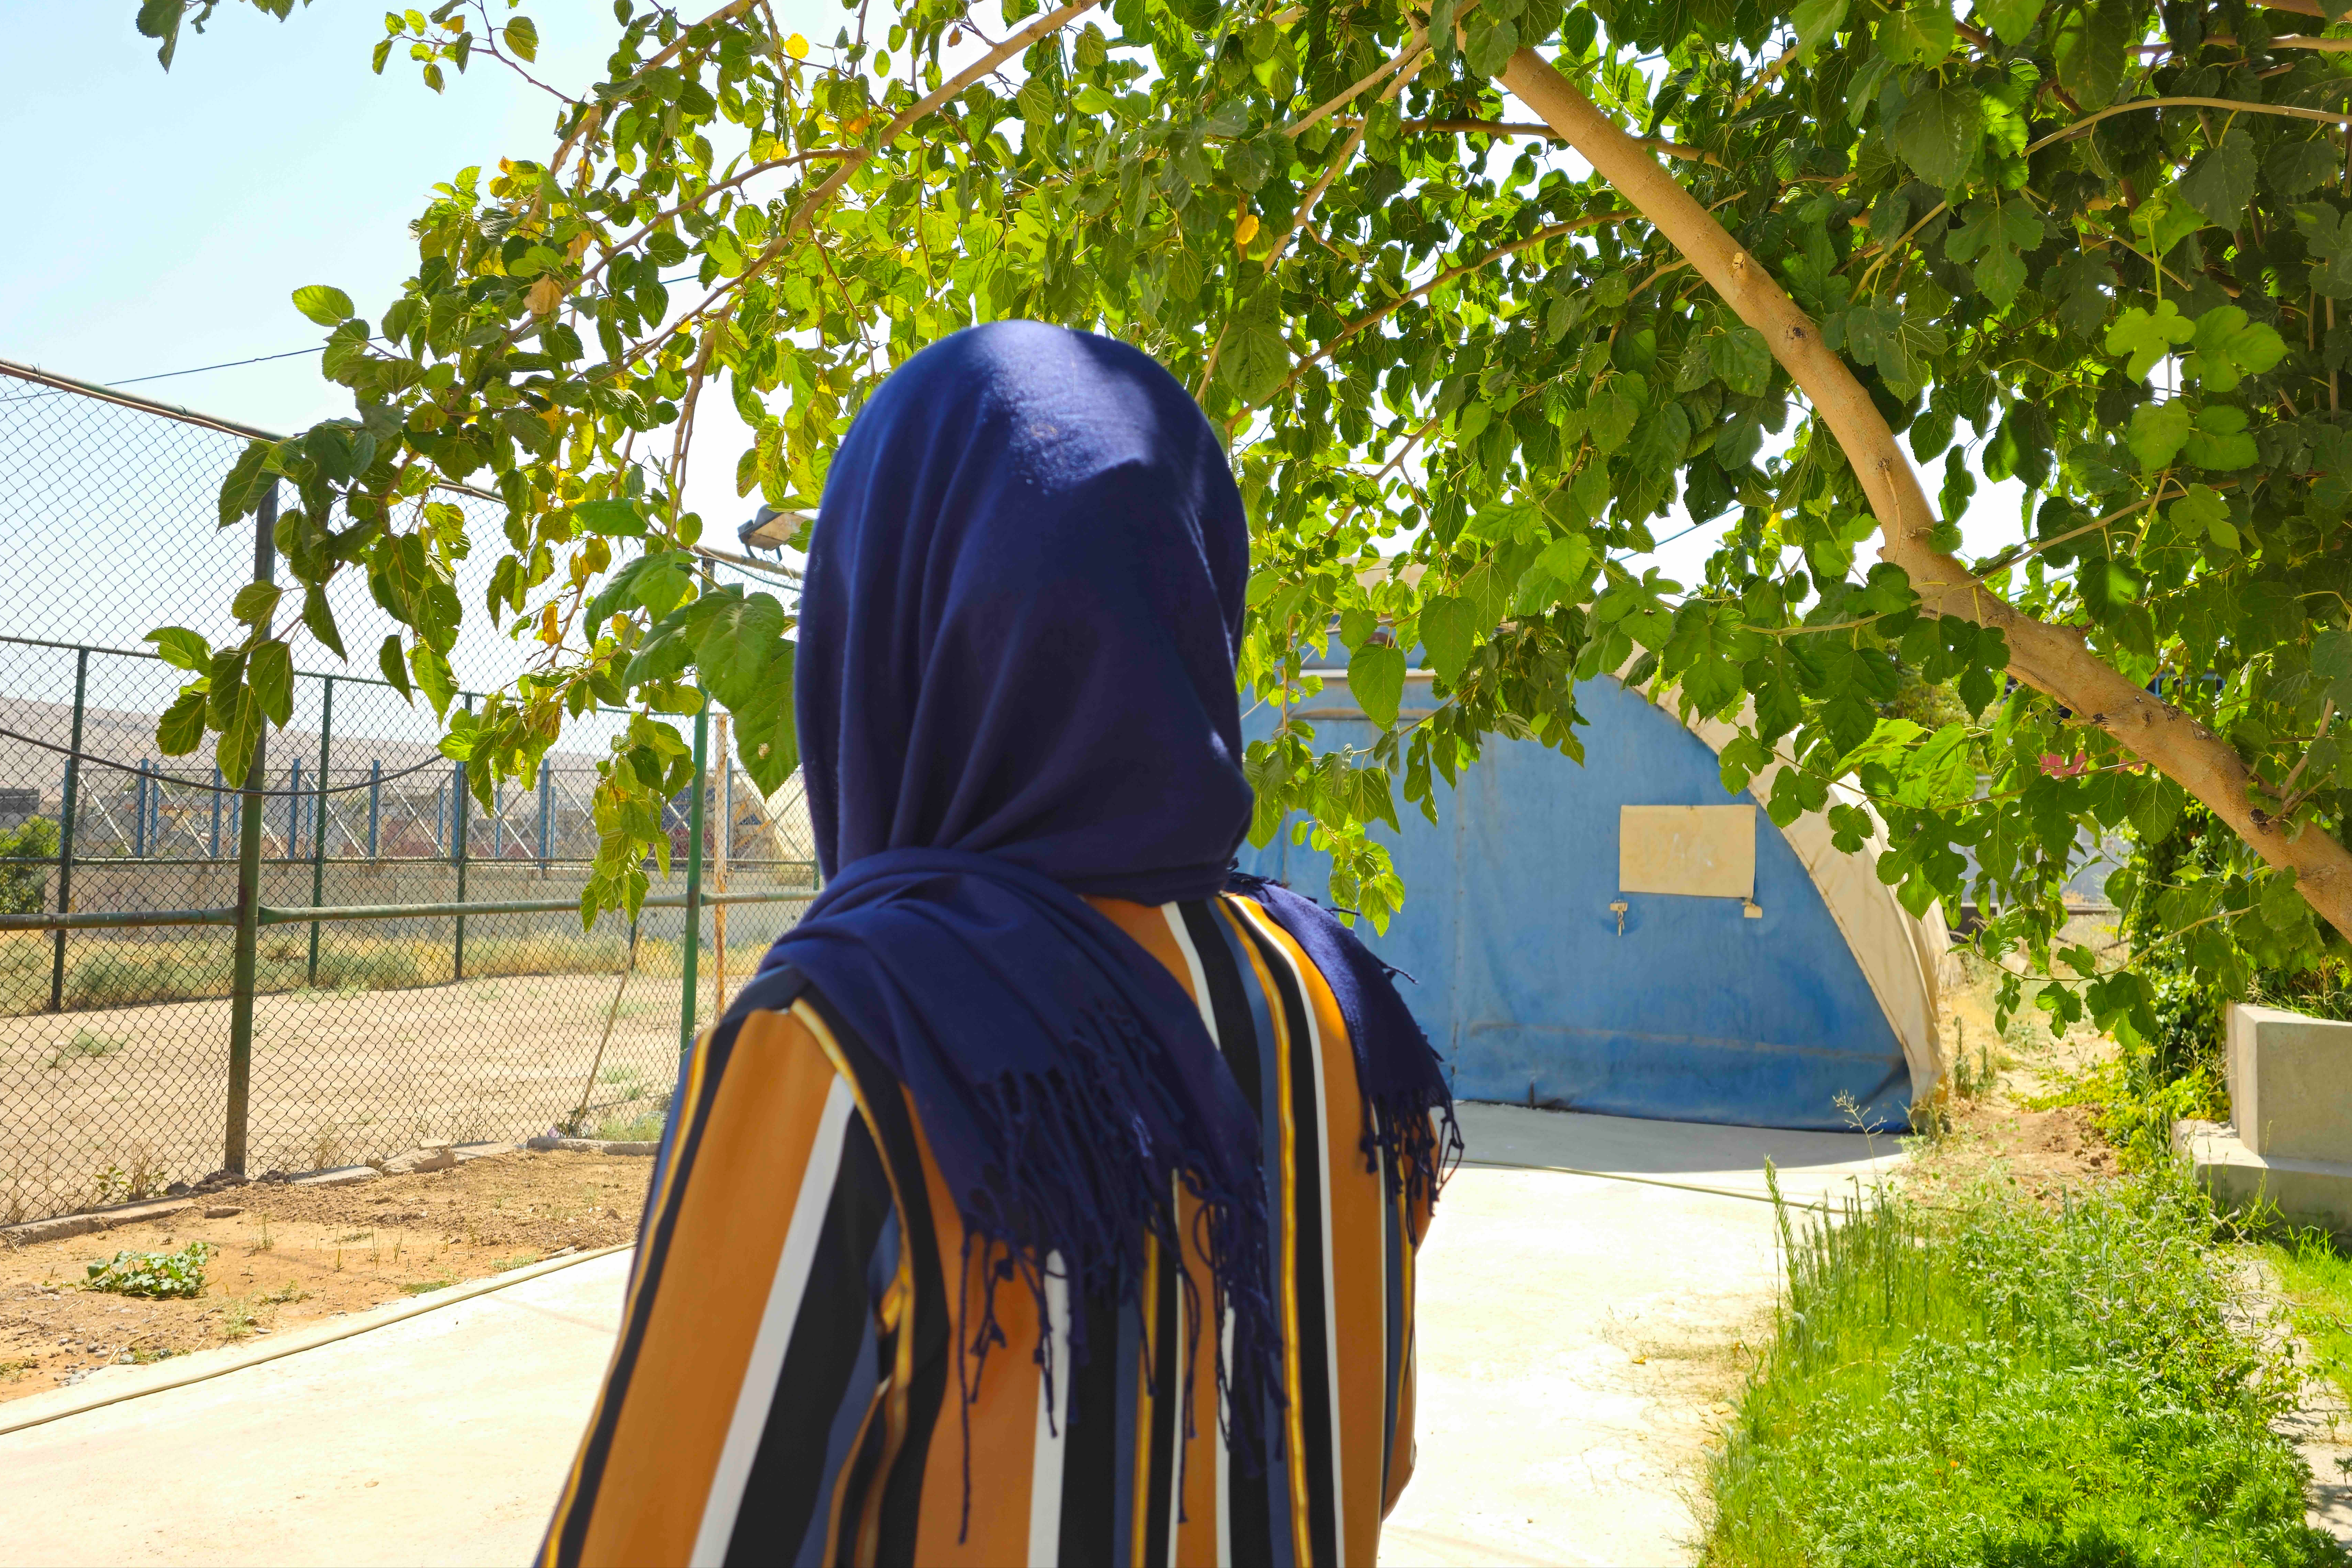 She was taken captive by Isis at age 15. Now she just wants a place to call home